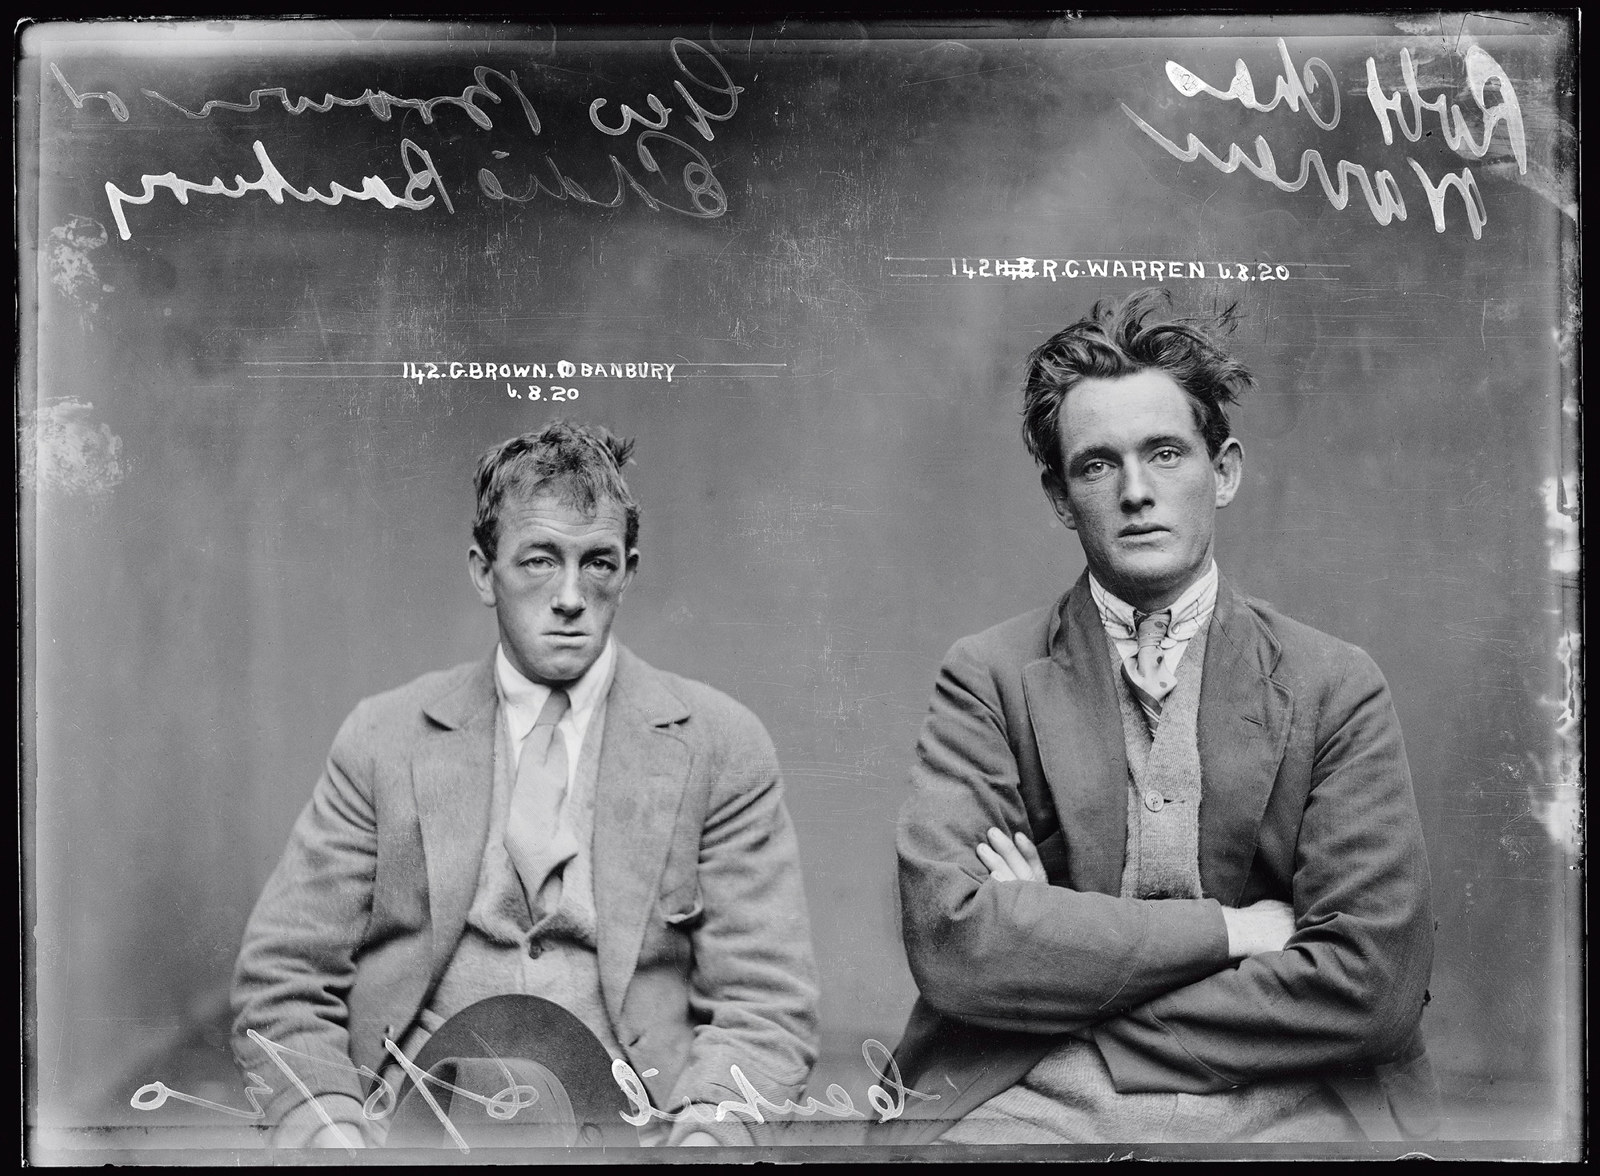 Black and white mugshot of two seated men.